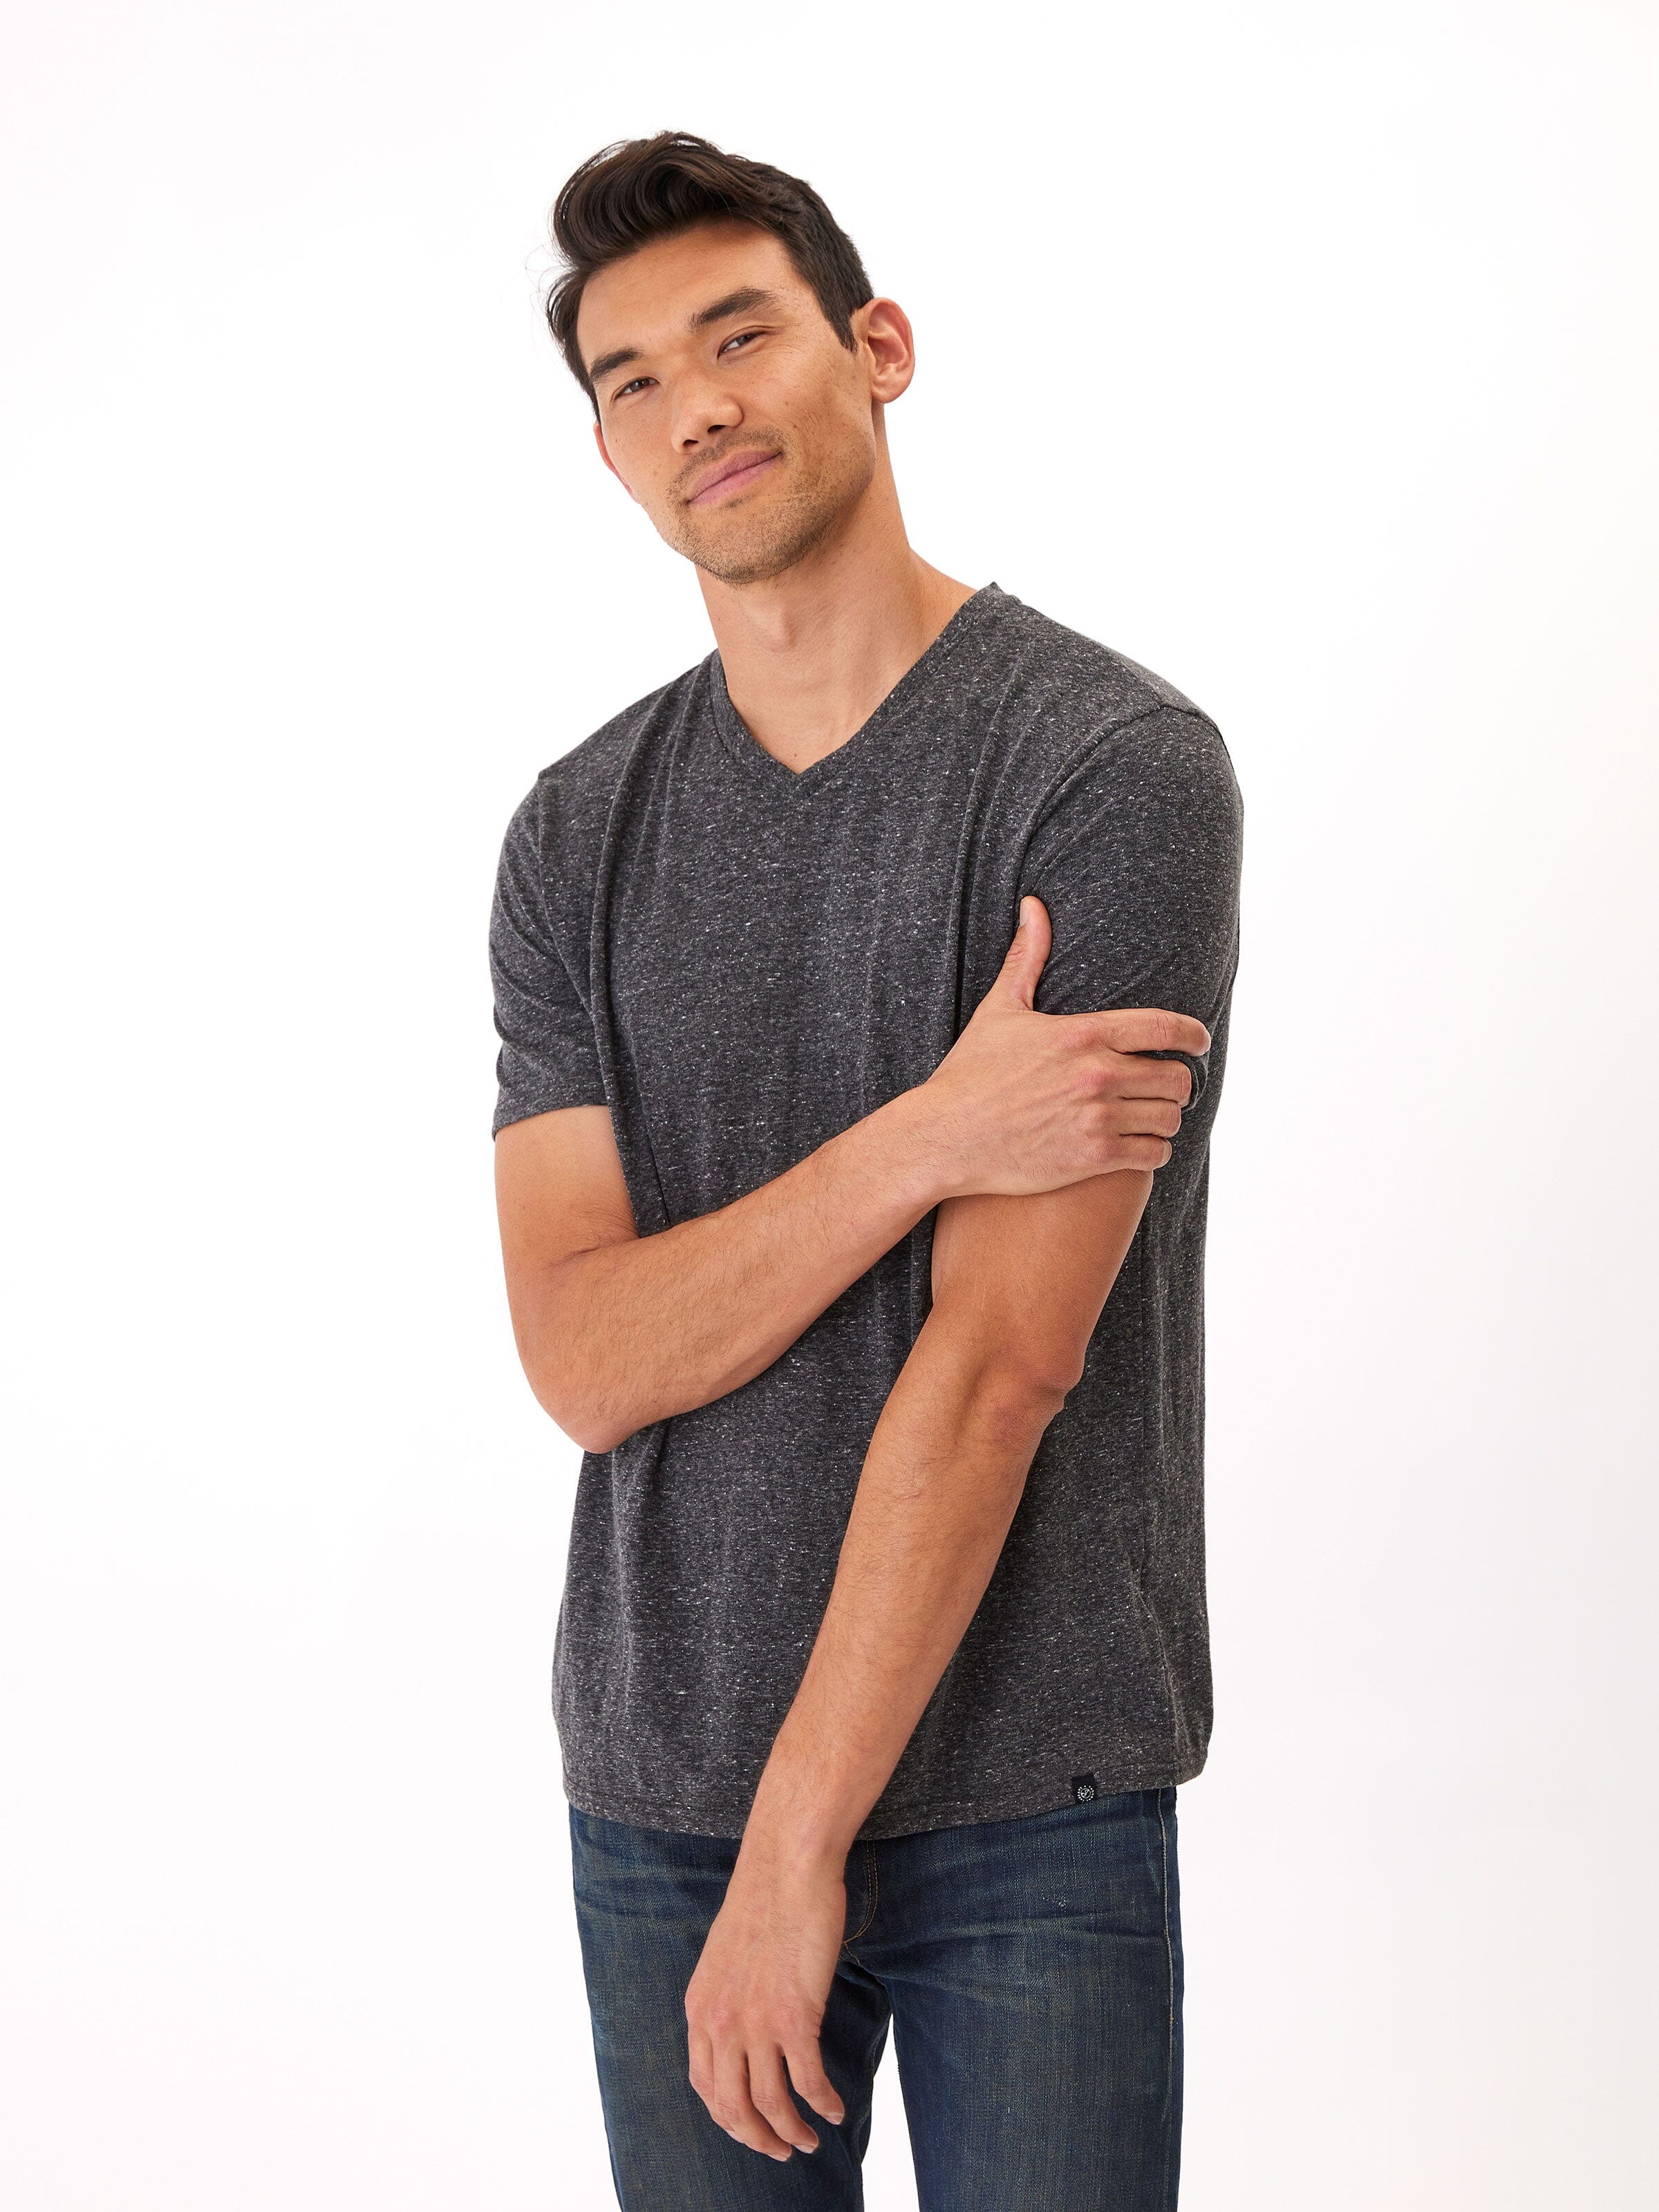 Triblend Crew Neck Tee in Heather Grey – Threads 4 Thought